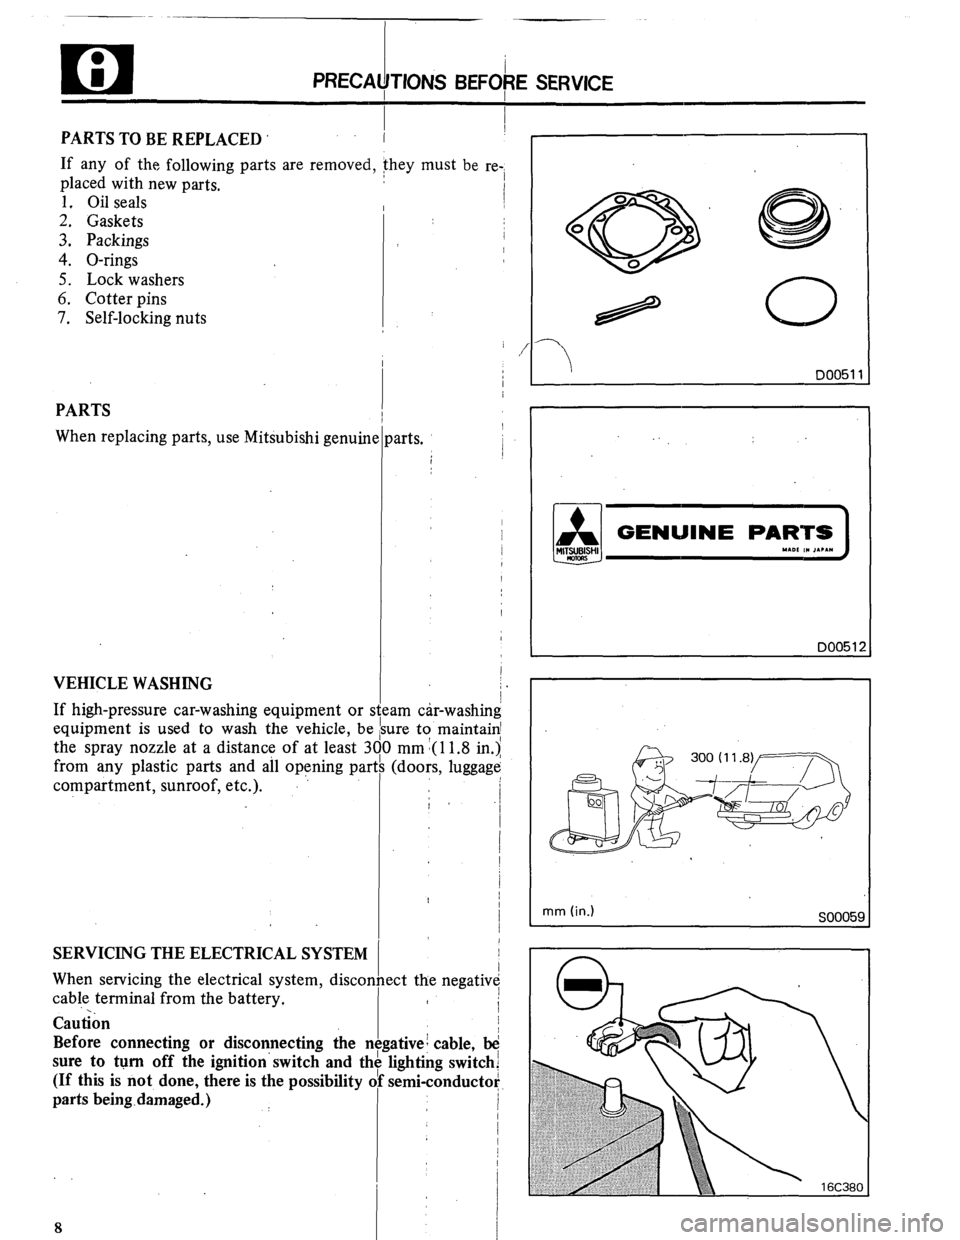 MITSUBISHI MONTERO 1984 1.G Workshop Manual u ; I 
PRECAl/TlONS BEFOFE SERVICE 
PARTS TO BE REPLACED I I 
If any of the following parts are removed, they must be re-i 
placed with new parts. 
1. Oil seals 
2. Gaskets 
3. Packings 
4. O-rings 
5